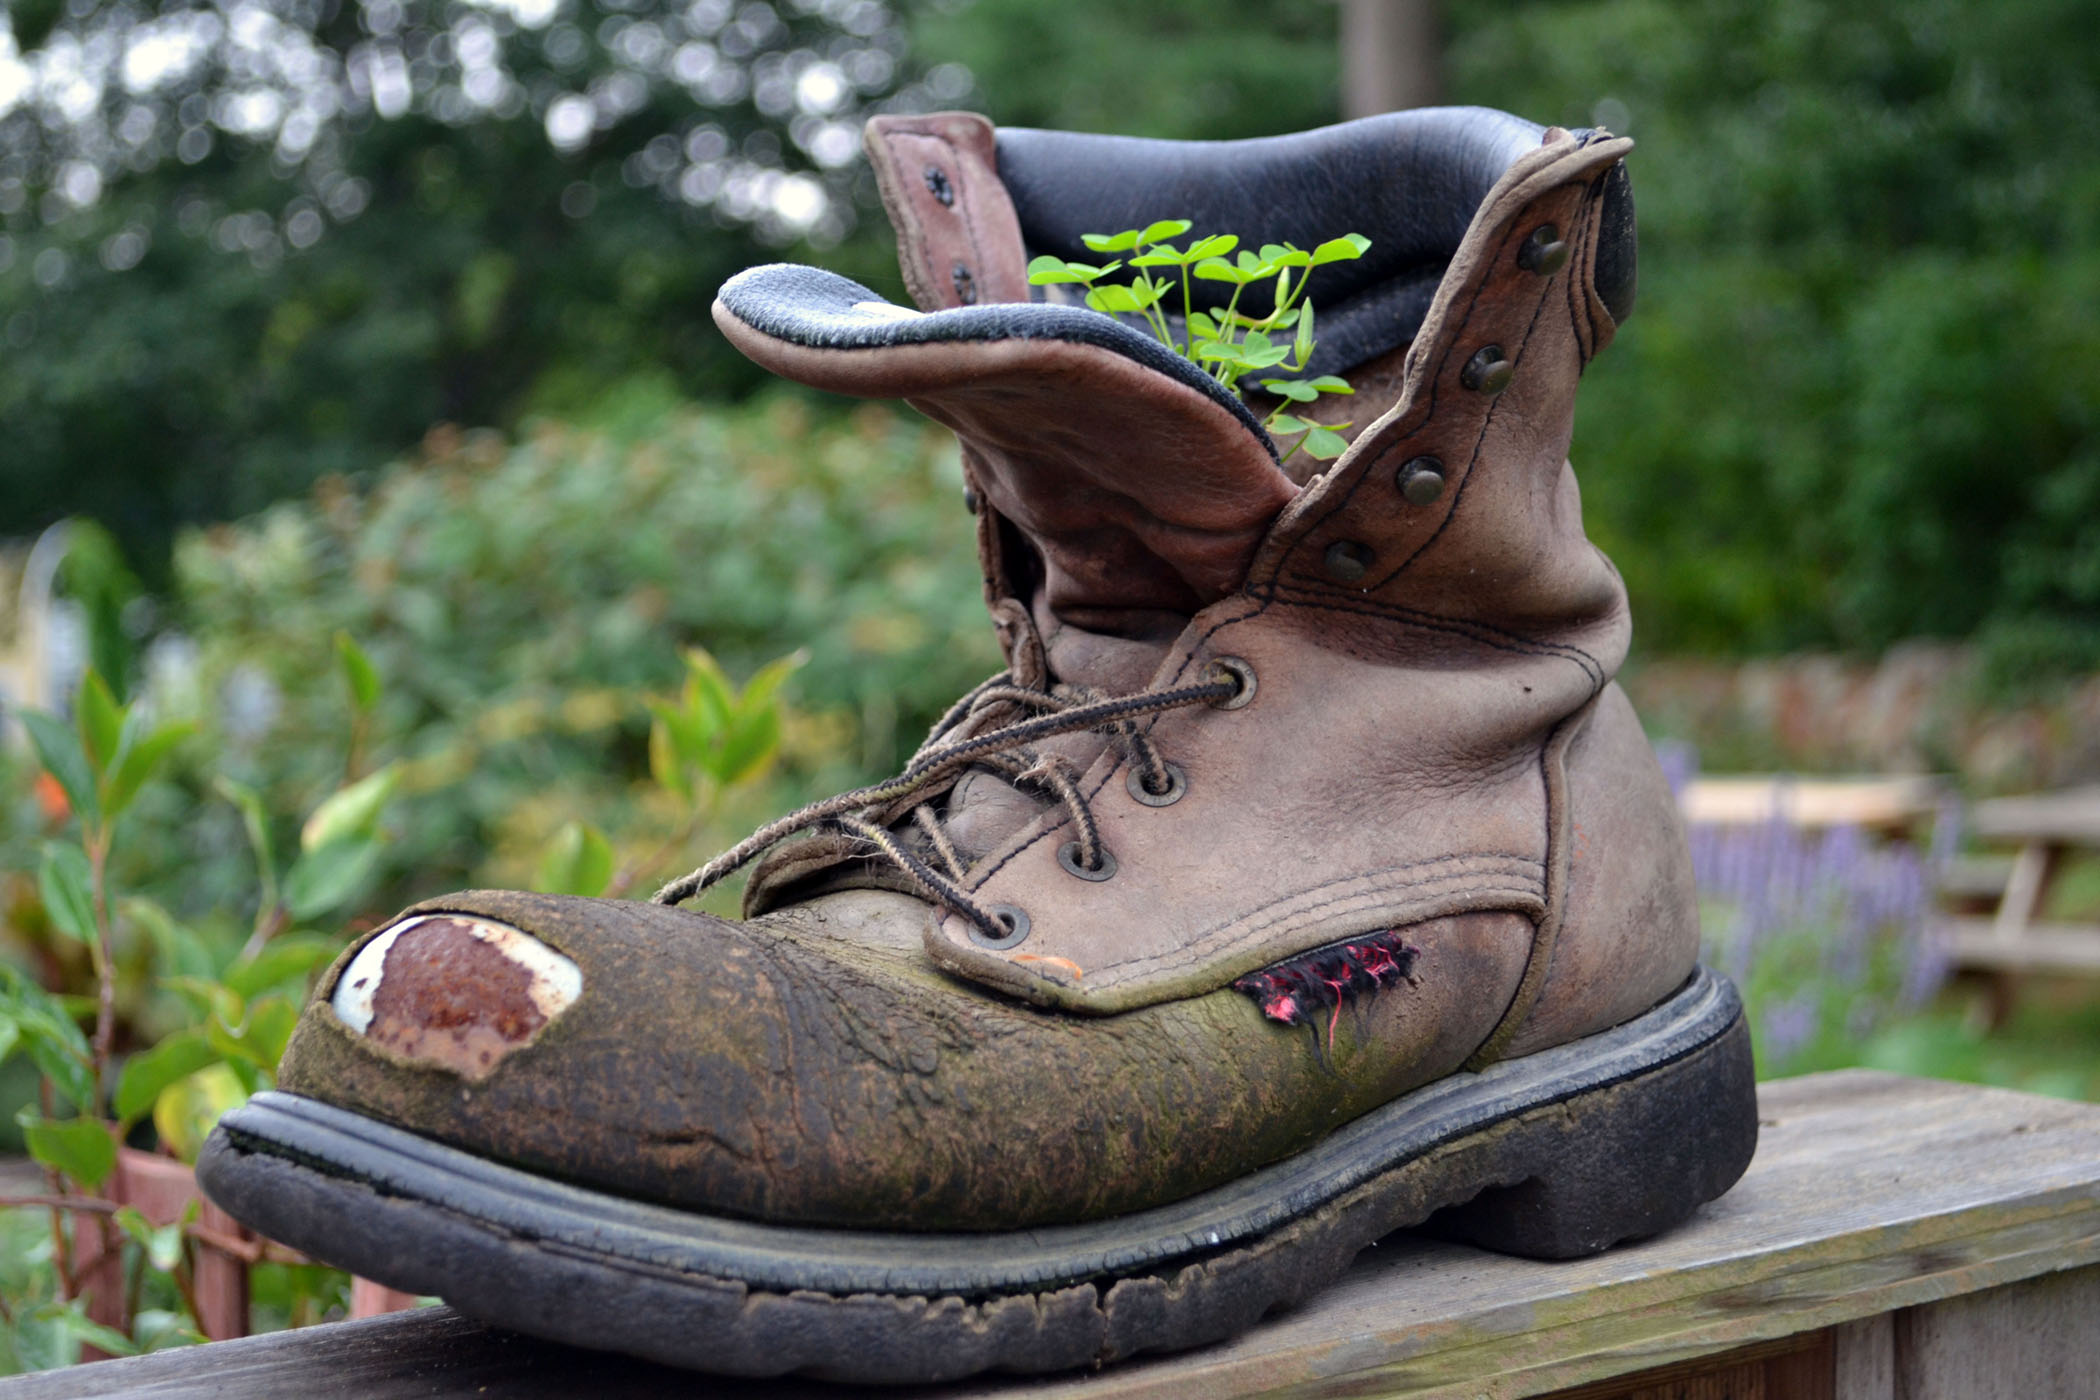 Garden Boot (user submitted)